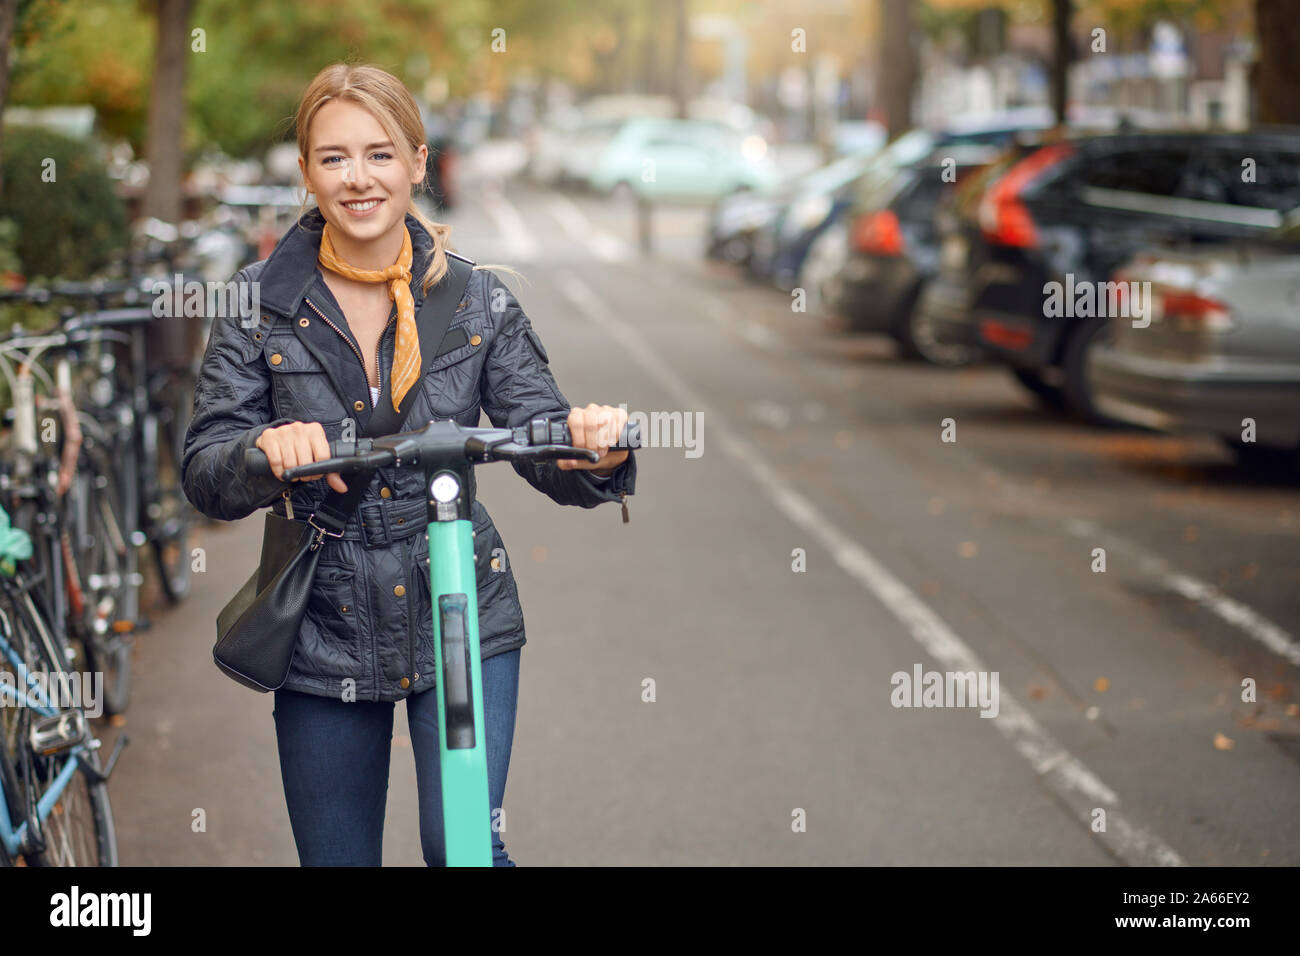 Young happy blond woman riding an electric scooter in the city, smiling at the camera, in autumn Stock Photo